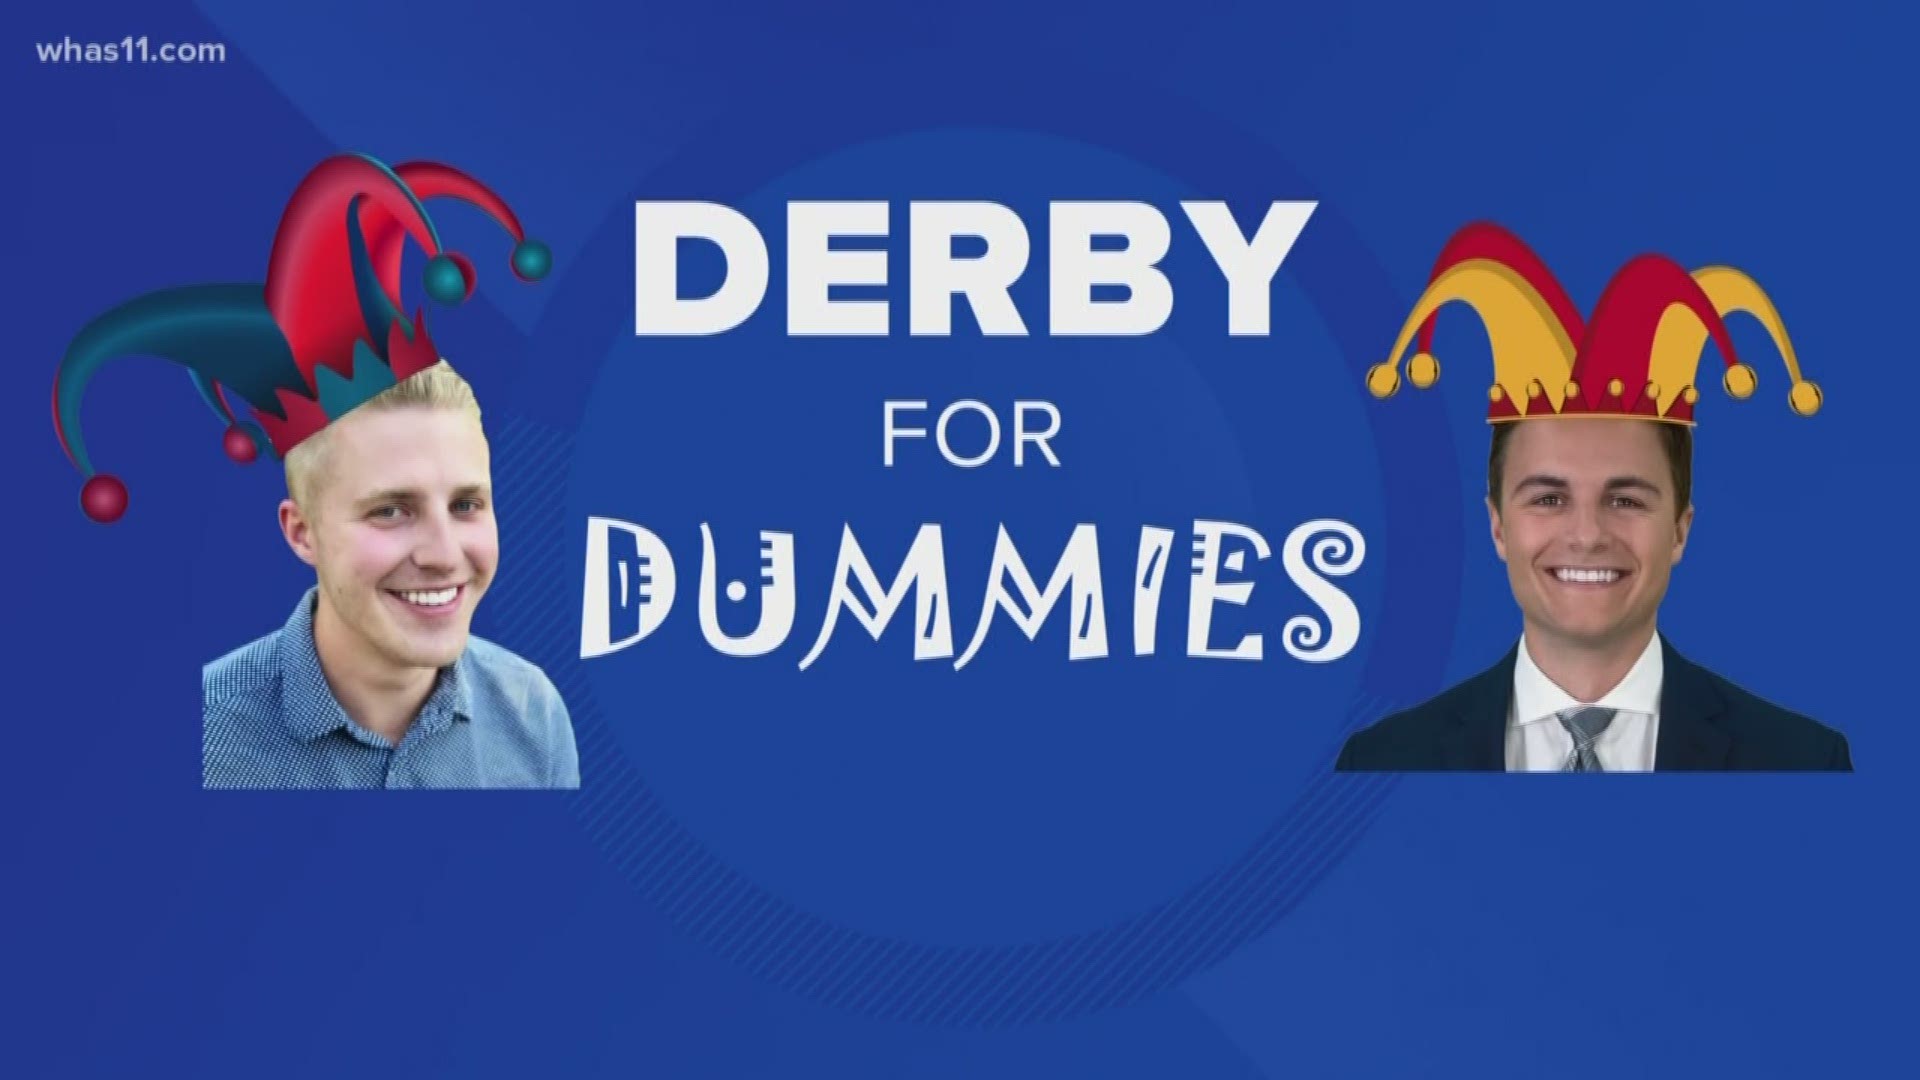 After a week of learning from Gary Roedemeier, are Daniel and Rob still Derby Dummies? Find out what they learned - and what you need to know before Saturday.